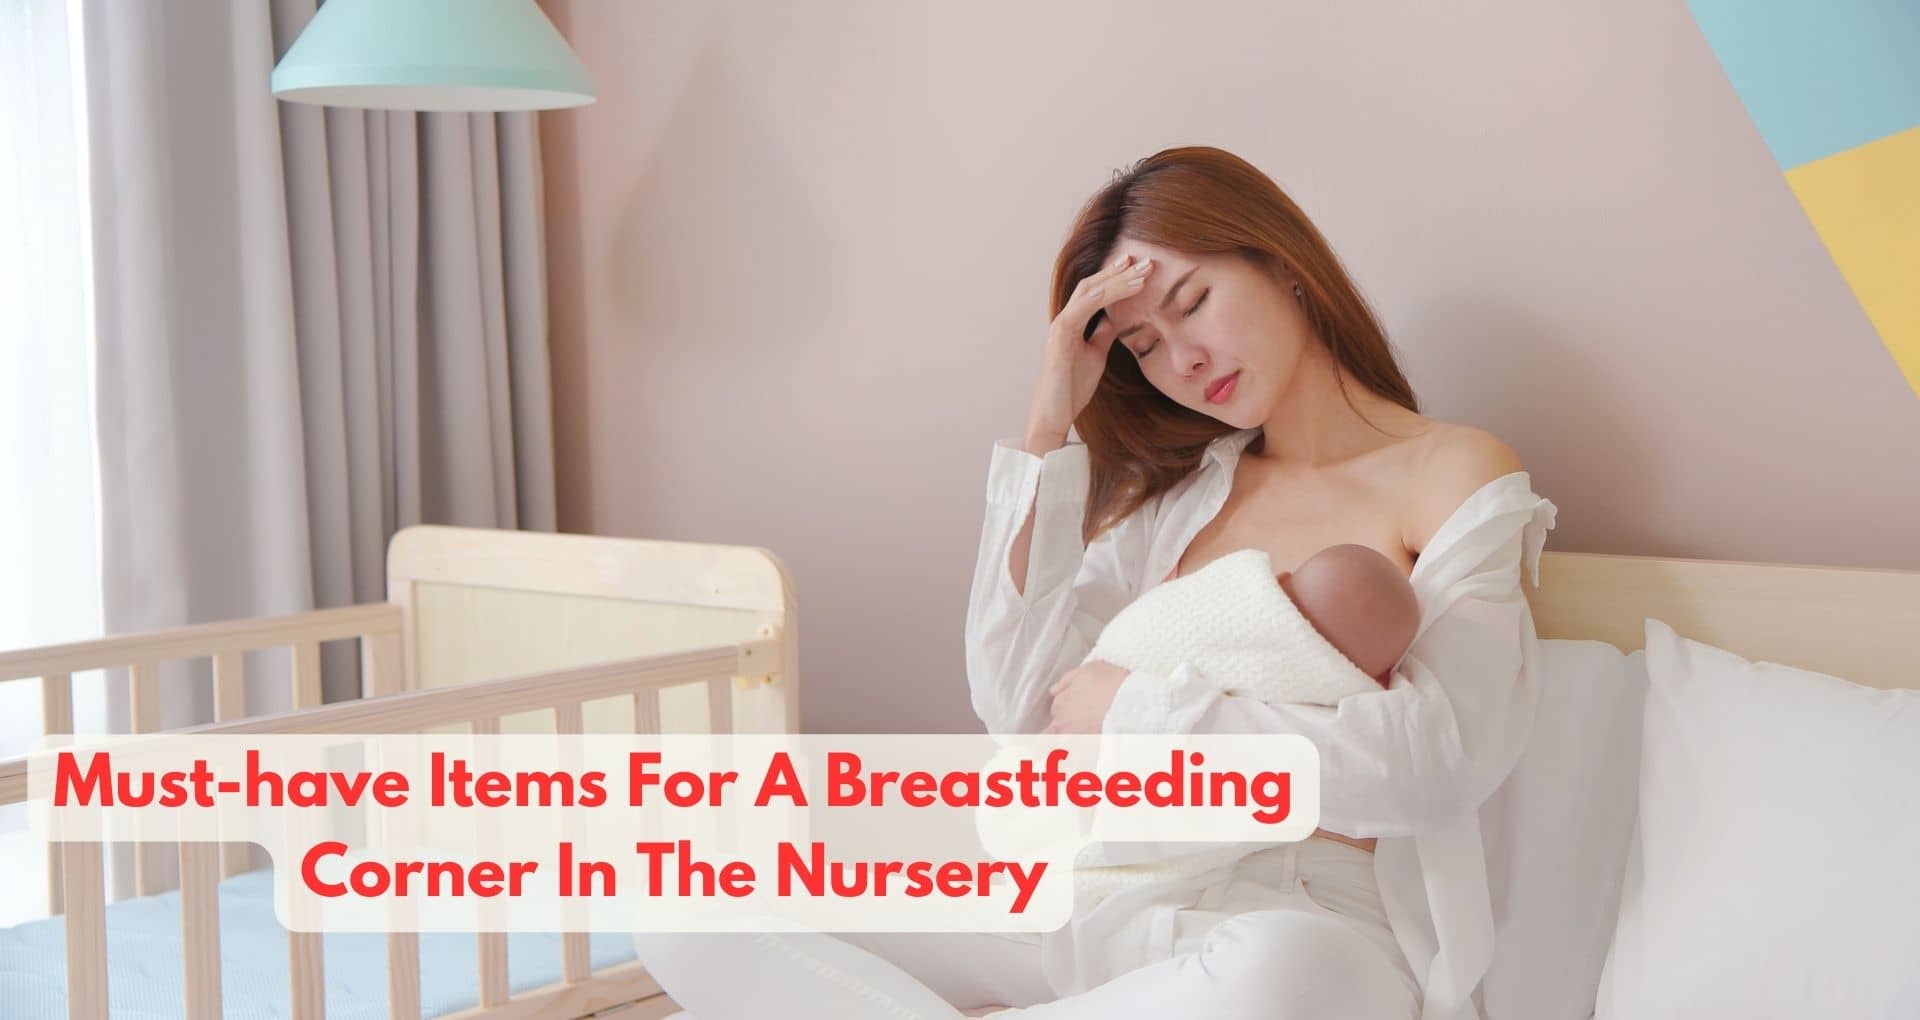 What Are The Must-have Best Breastfeeding Items